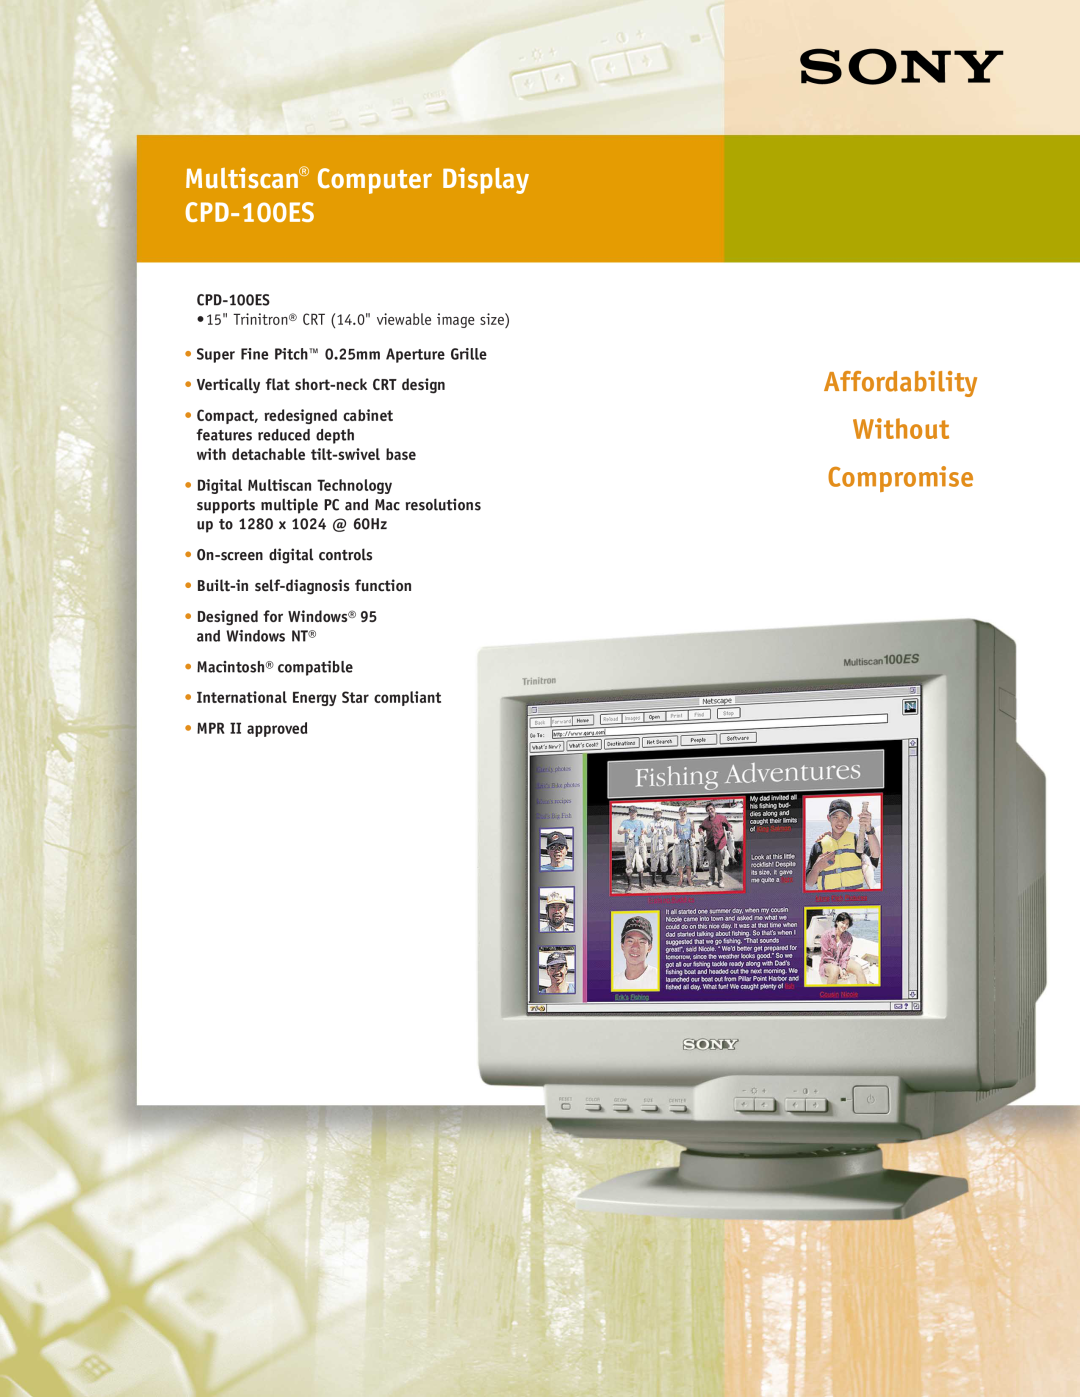 Sony manual Multiscan Computer Display CPD-100ES, Affordability Without Compromise 